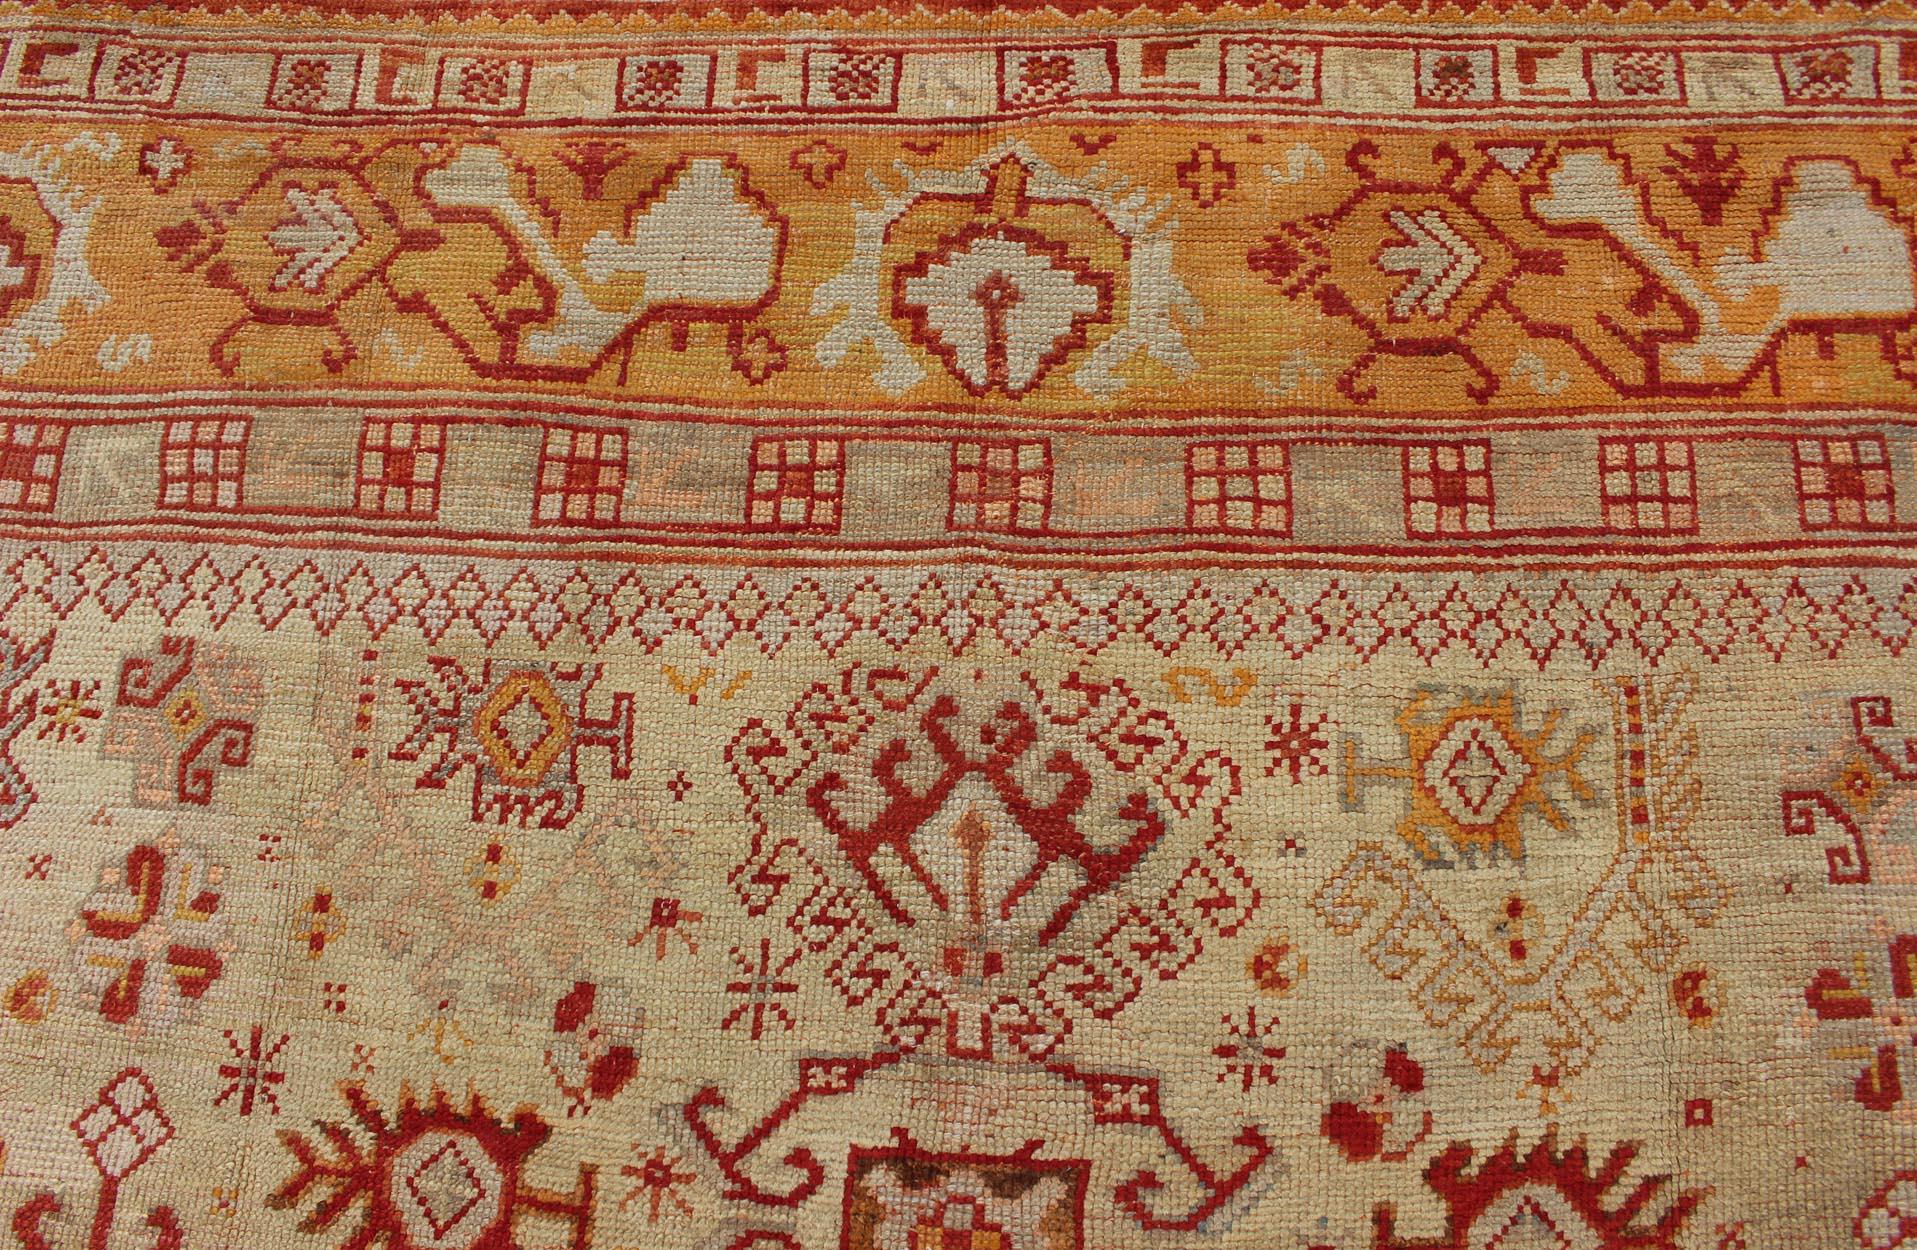 Wool Antique Turkish Oushak Carpet With All-Over Design In Red, Taupe, and Orange For Sale